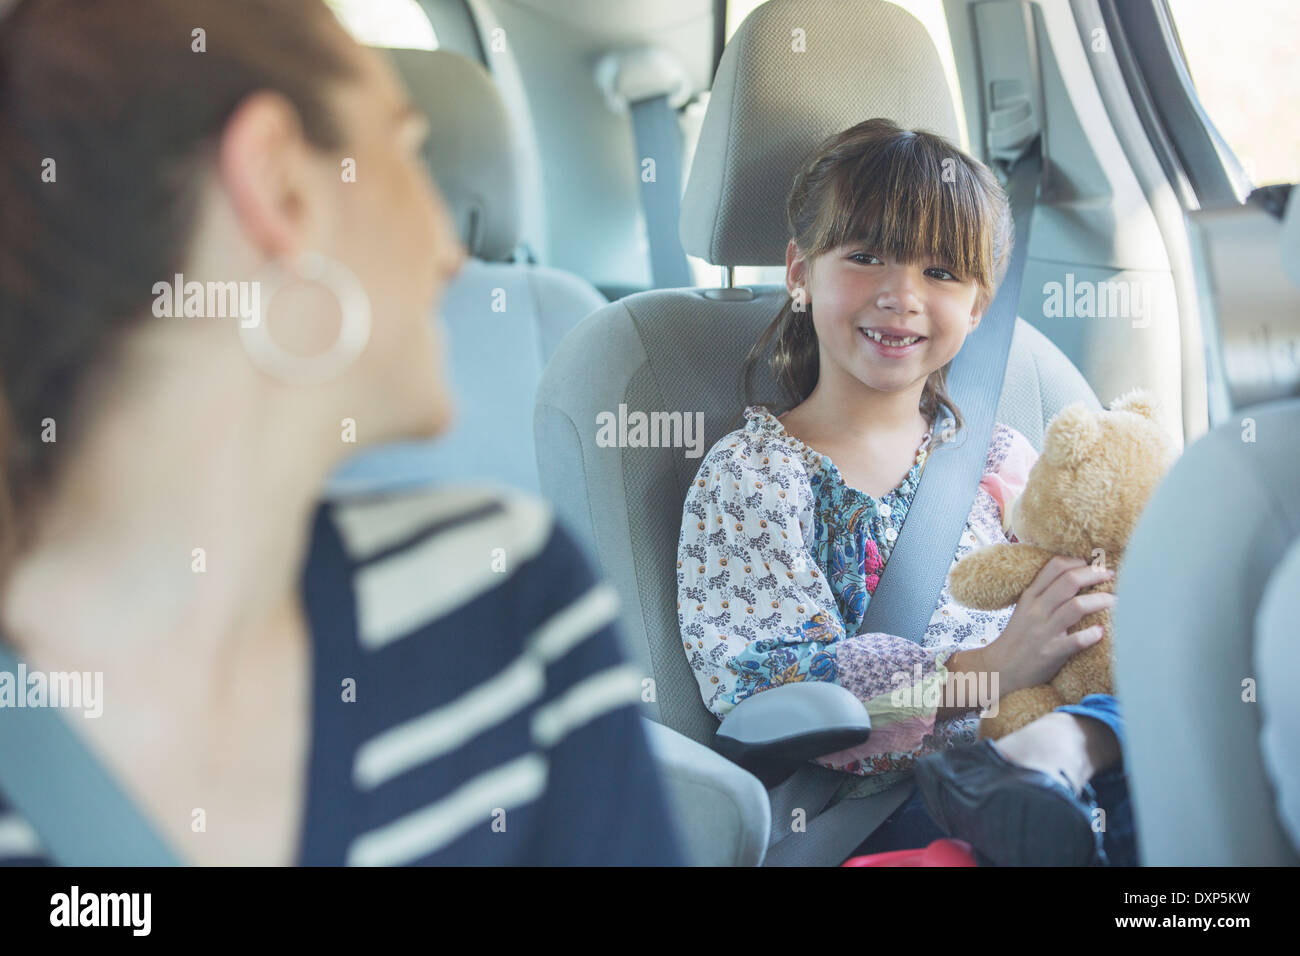 Mother turning and smiling at daughter in back seat of car Stock Photo